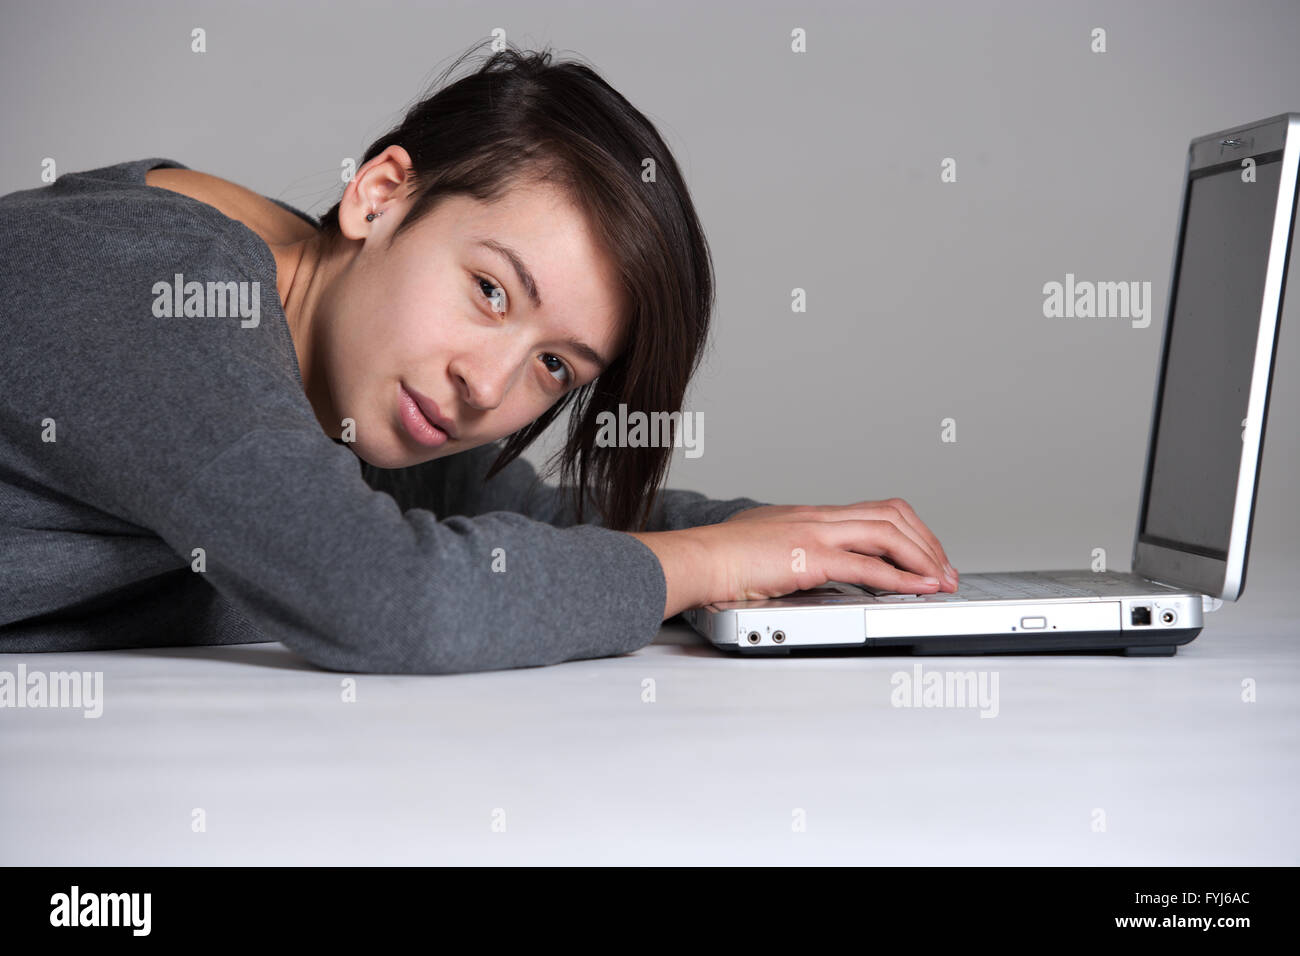 Young woman on floor with notebook Stock Photo